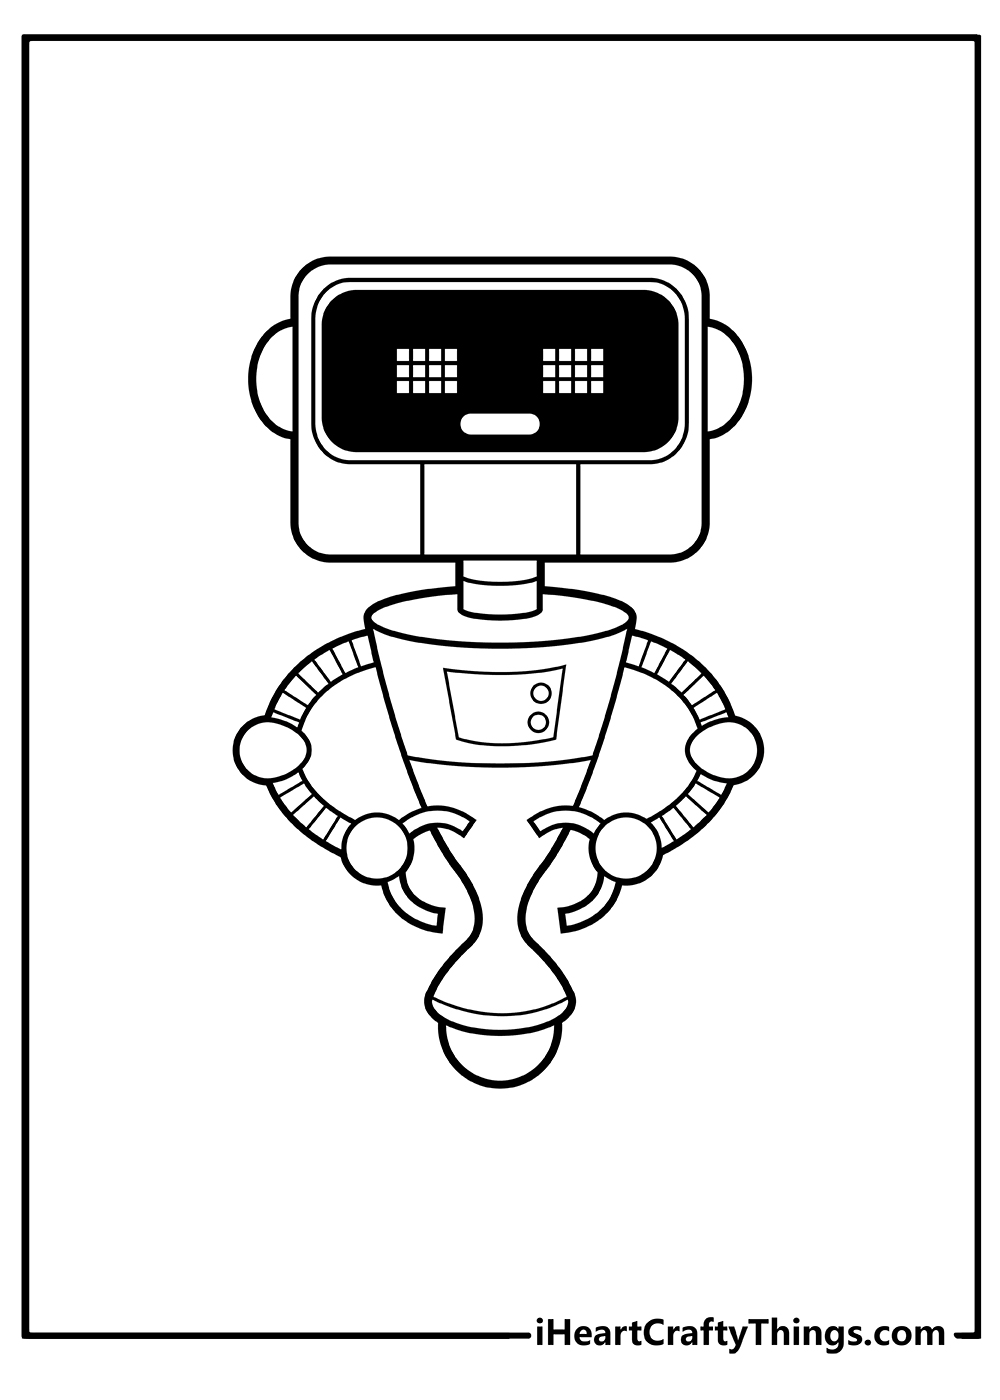 original Robot Coloring Pages free download